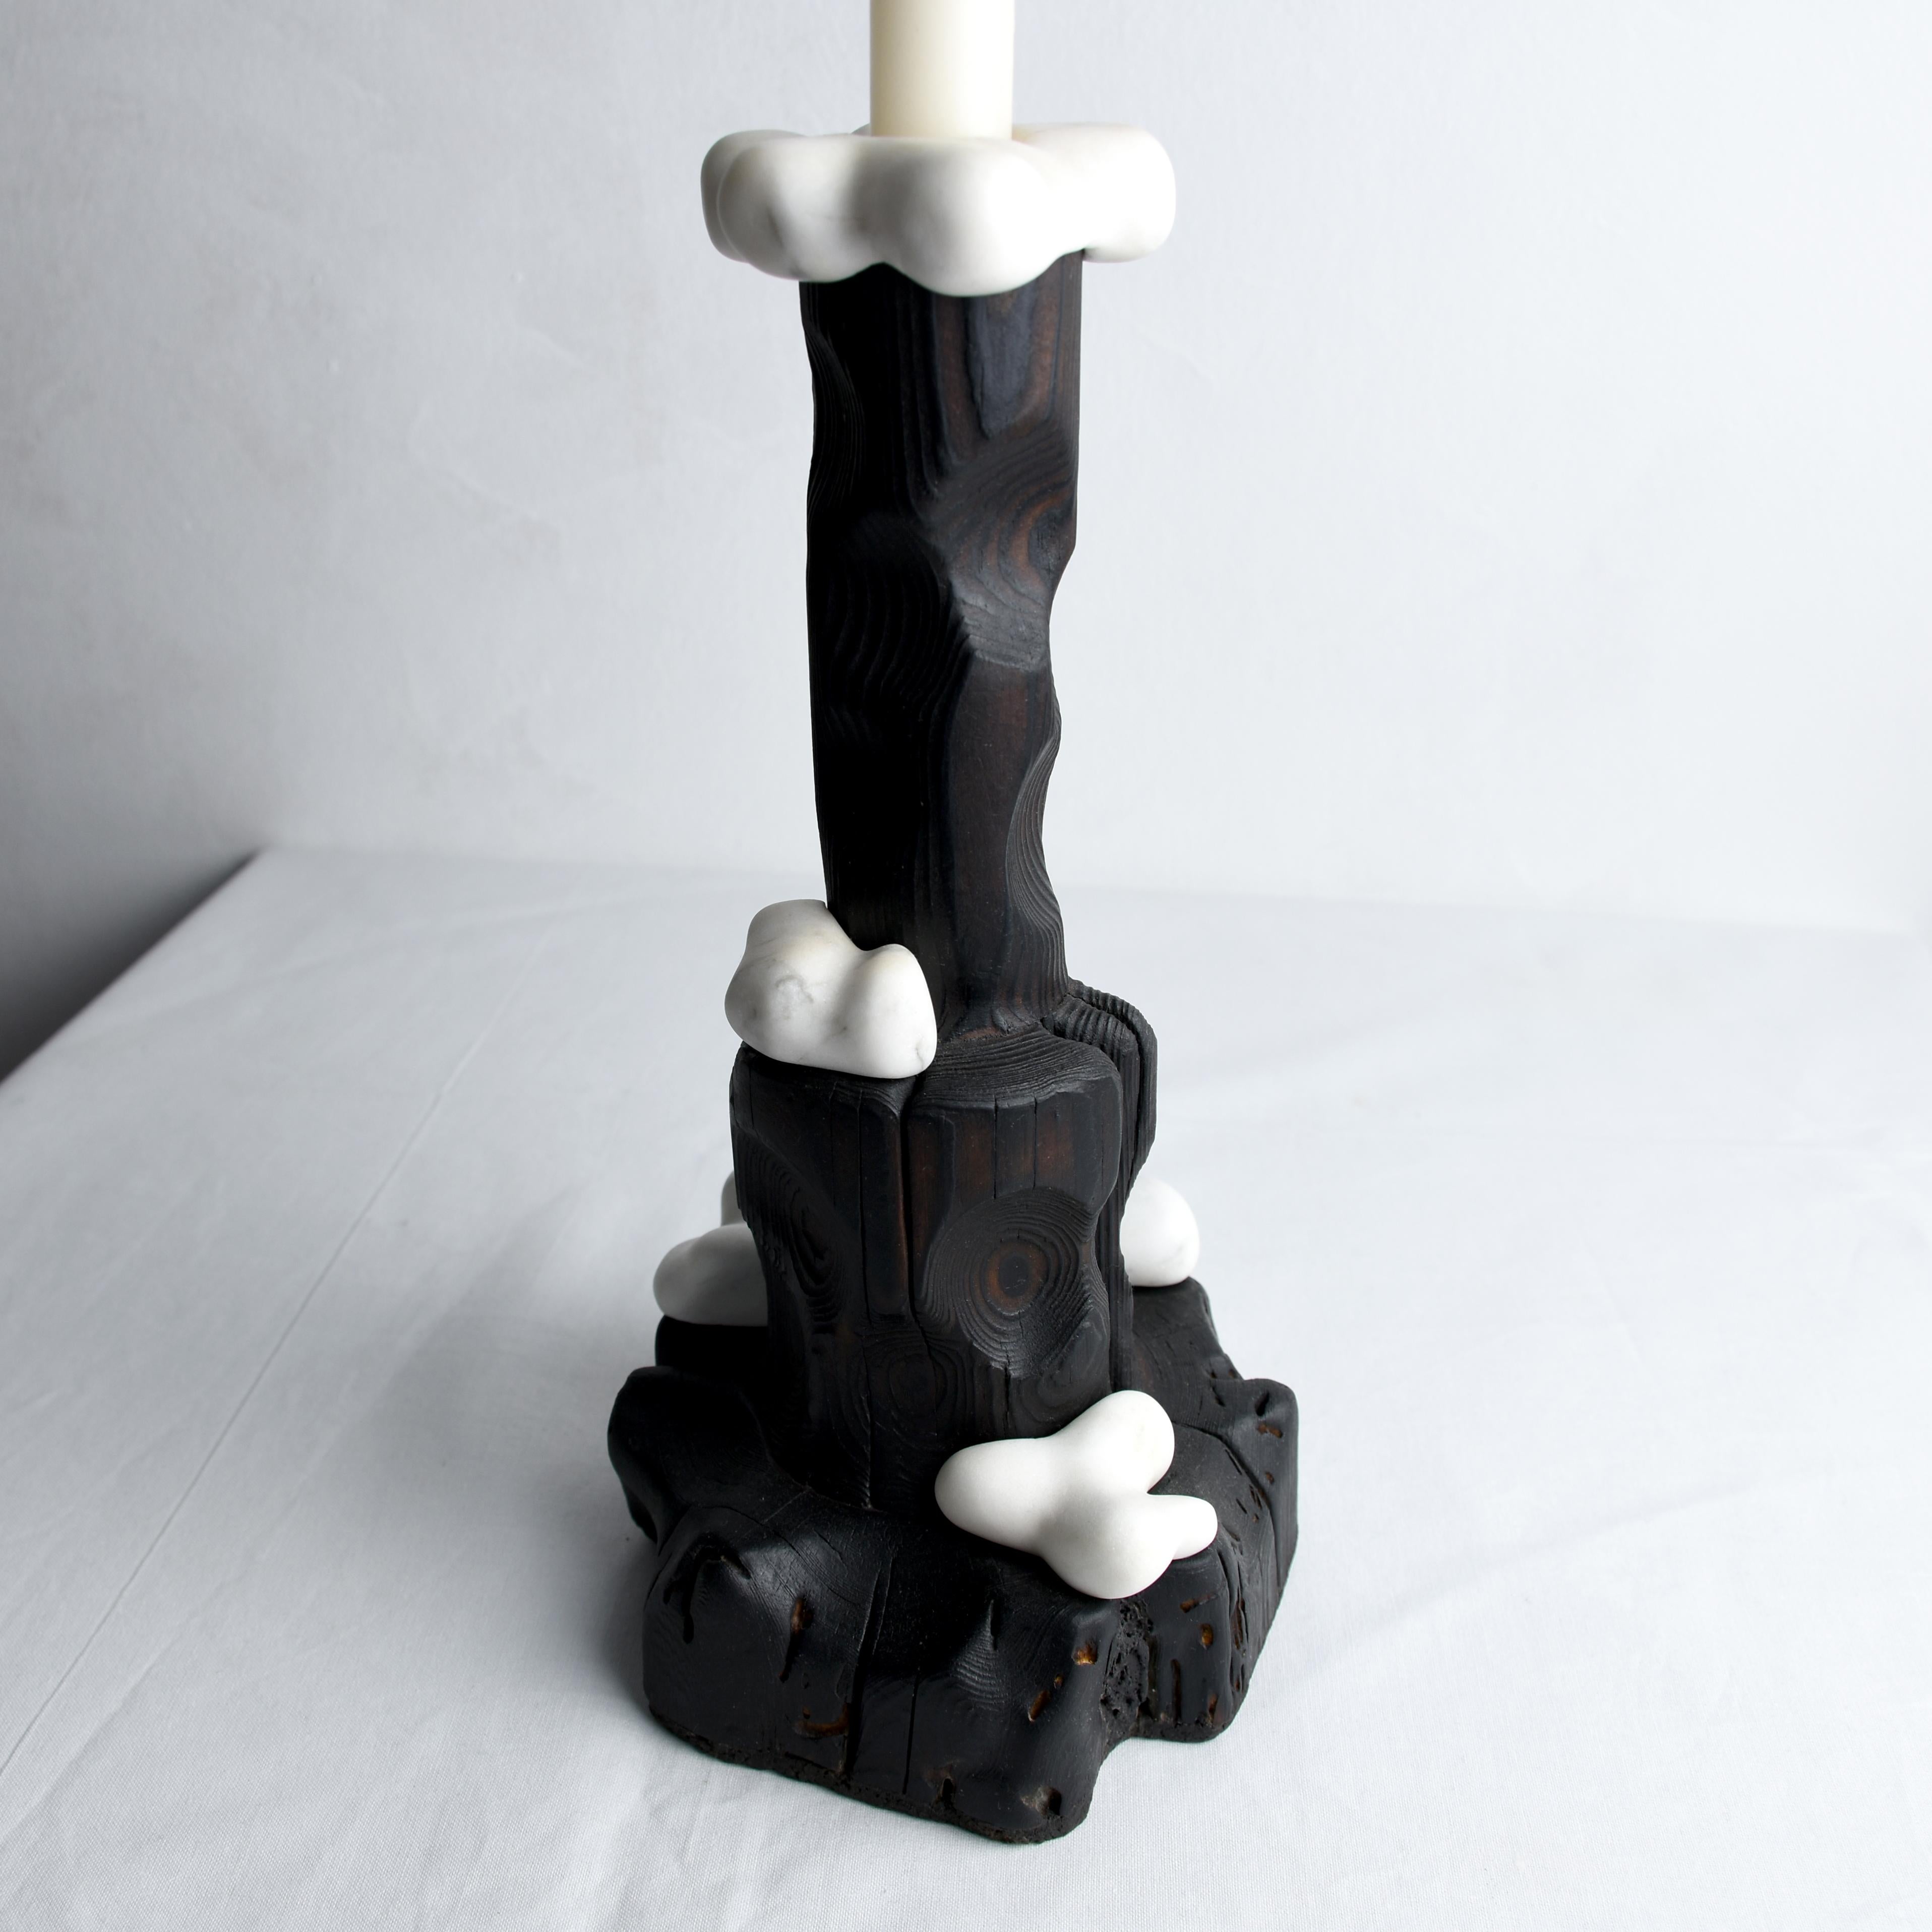 Organic Modern Cumulus, Sculptured Candle Holder from Reclaimed Burned Wood and White Marble For Sale